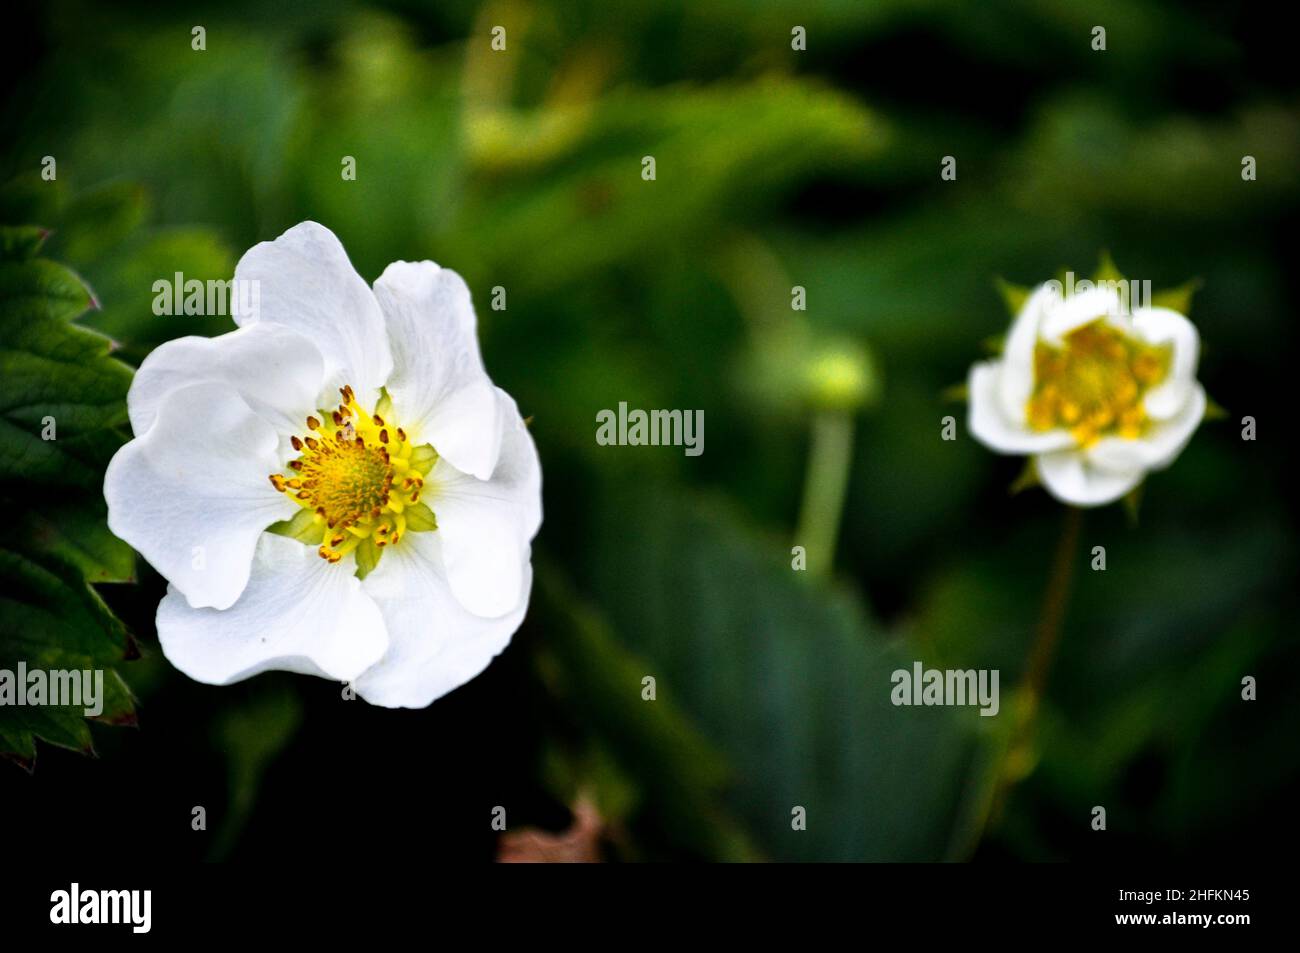 A close up of a cultivated strawberry flower with white petals. The background is of leaves and a second flower is blurred and just beginning to open Stock Photo